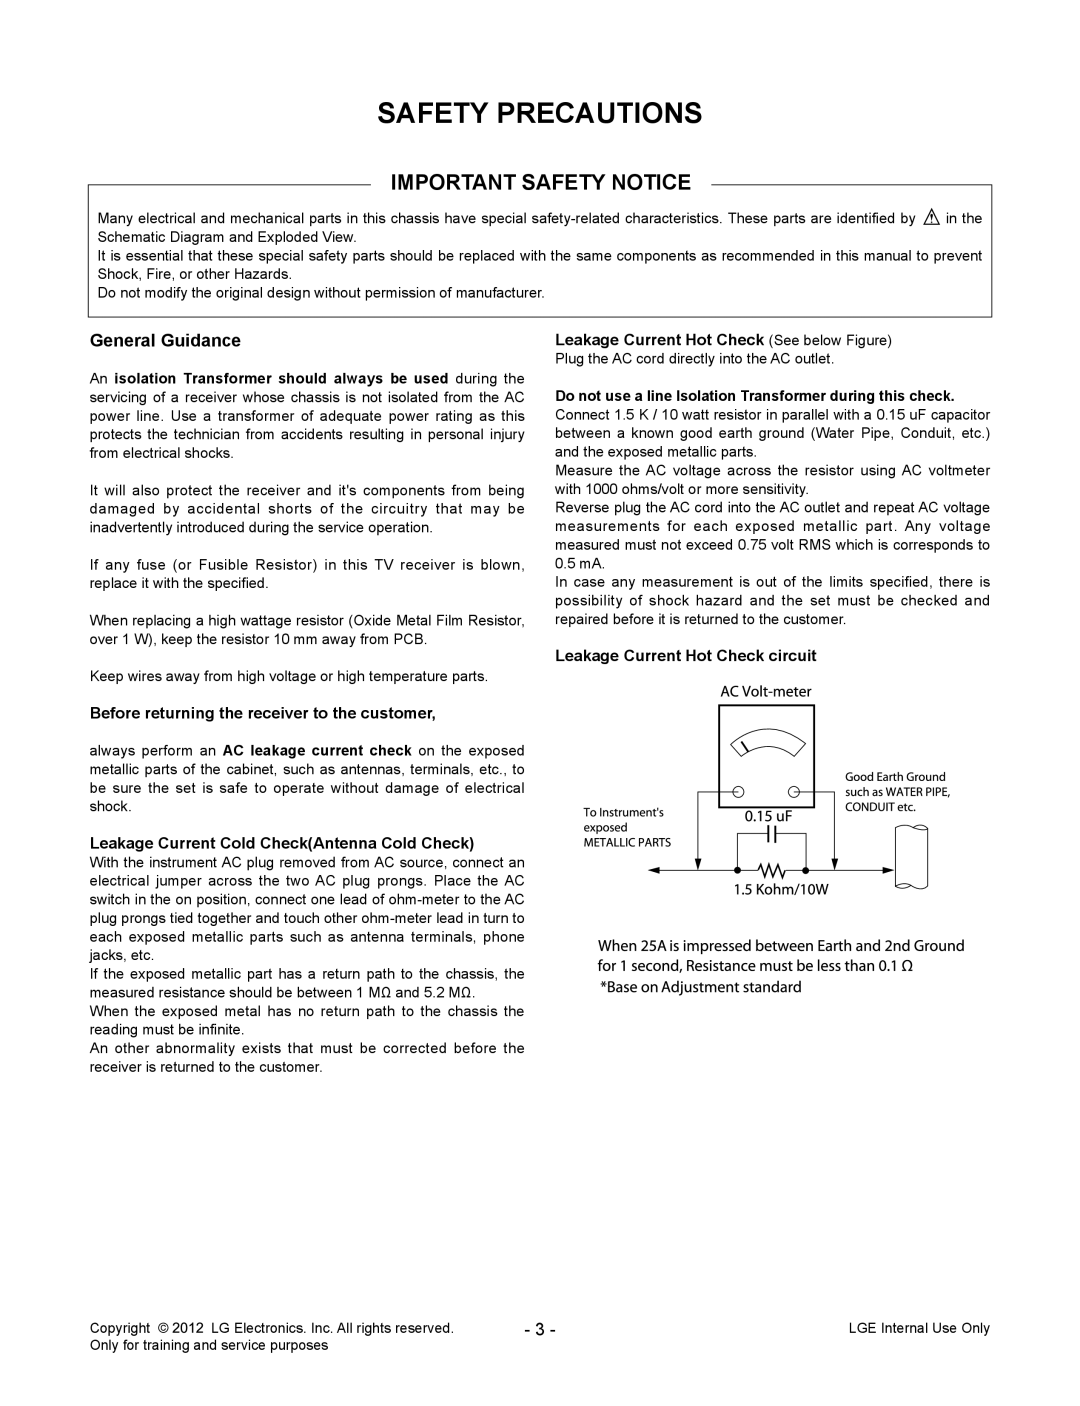 LG Electronics 340S, 3450, 340T service manual Safety Precautions, Important Safety Notice 